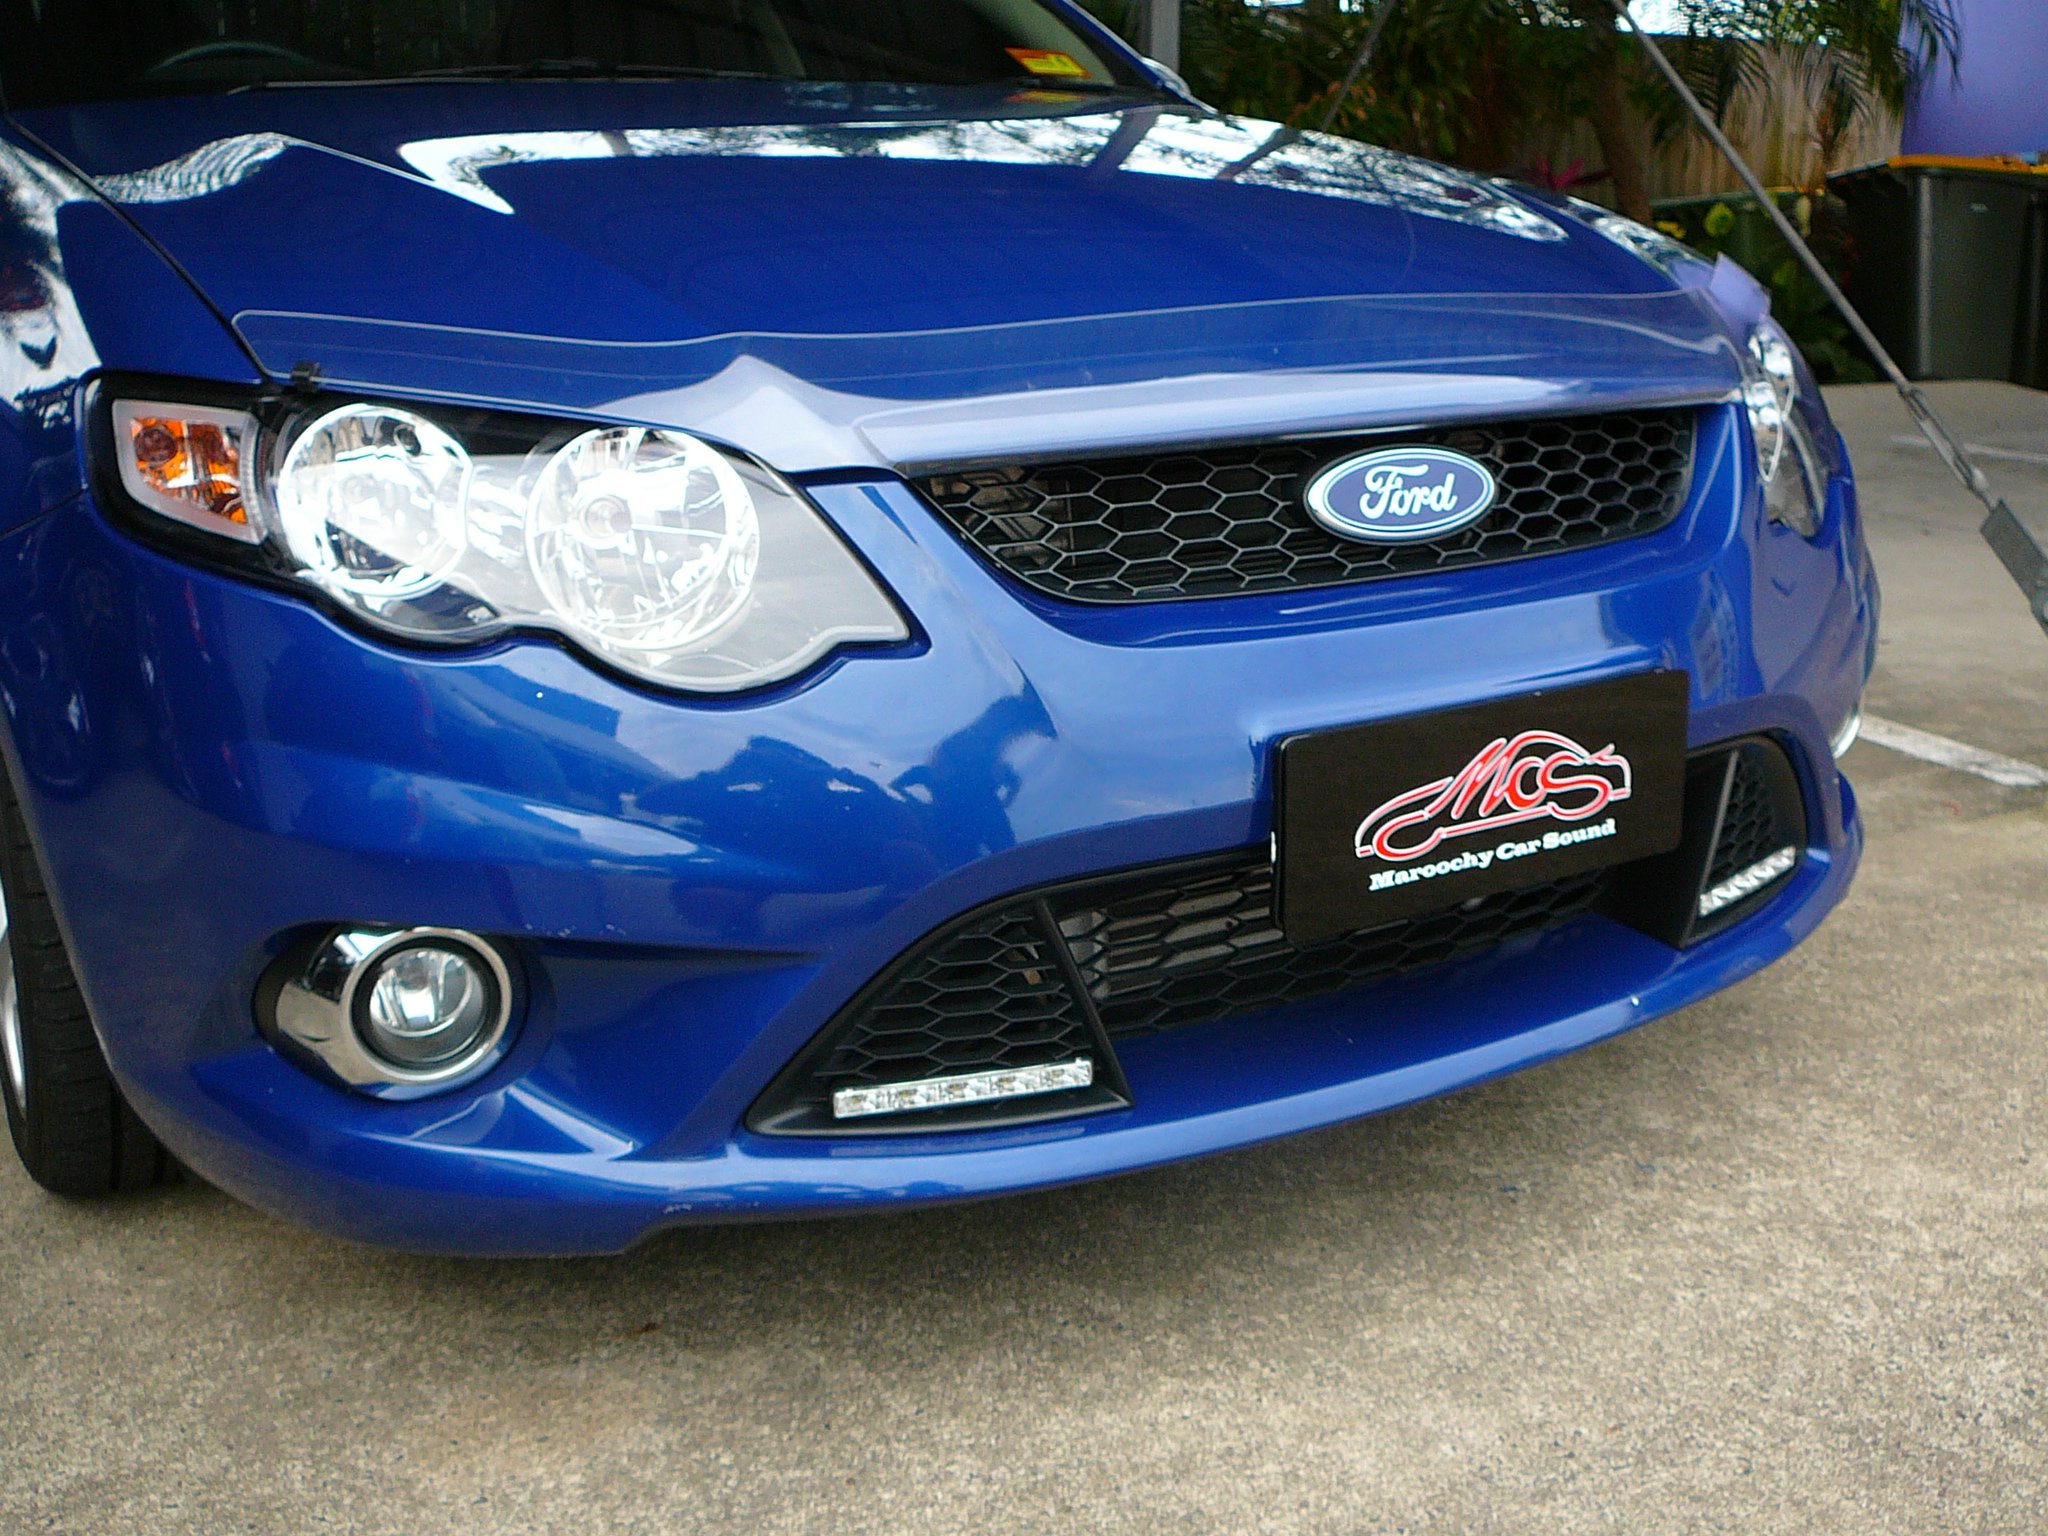 Ford Falcon XR6T 2009, Philips DRL’s